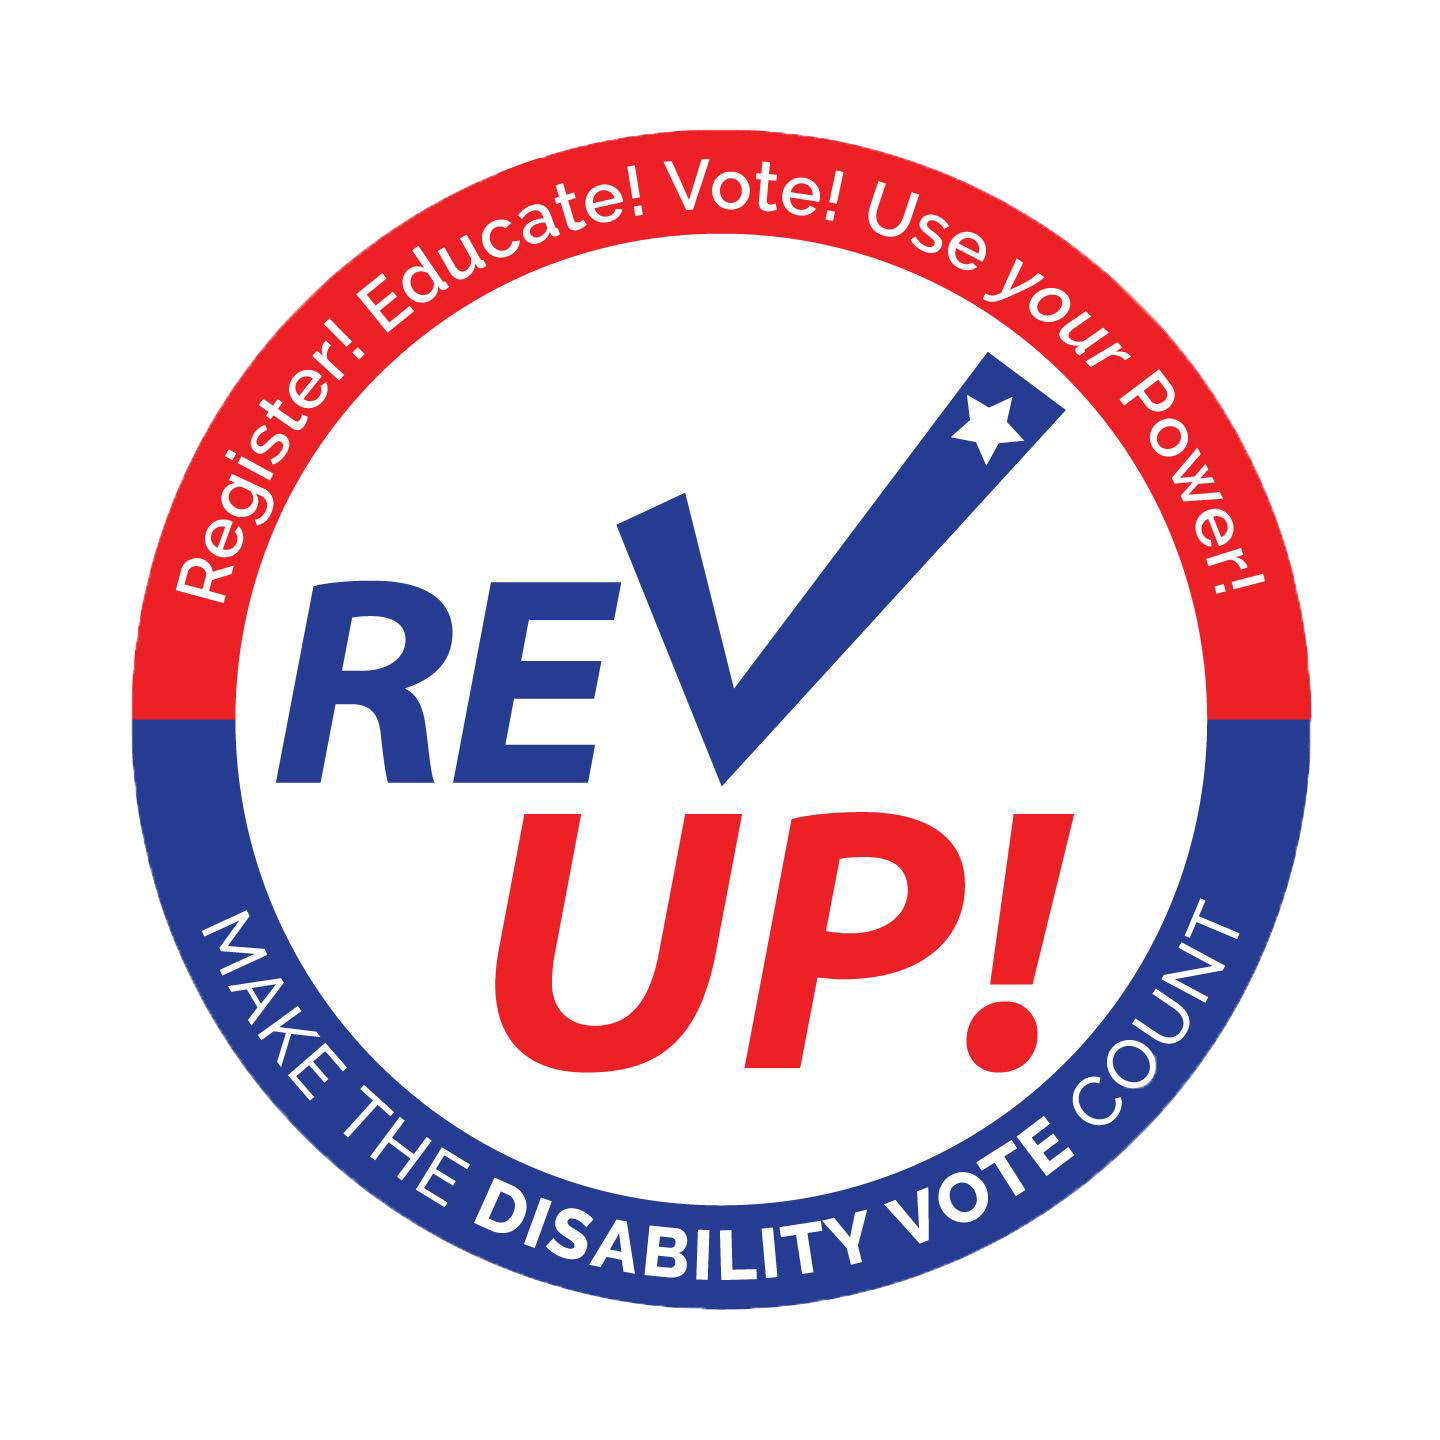 REV UP! Register Educate Vote Use Your Power